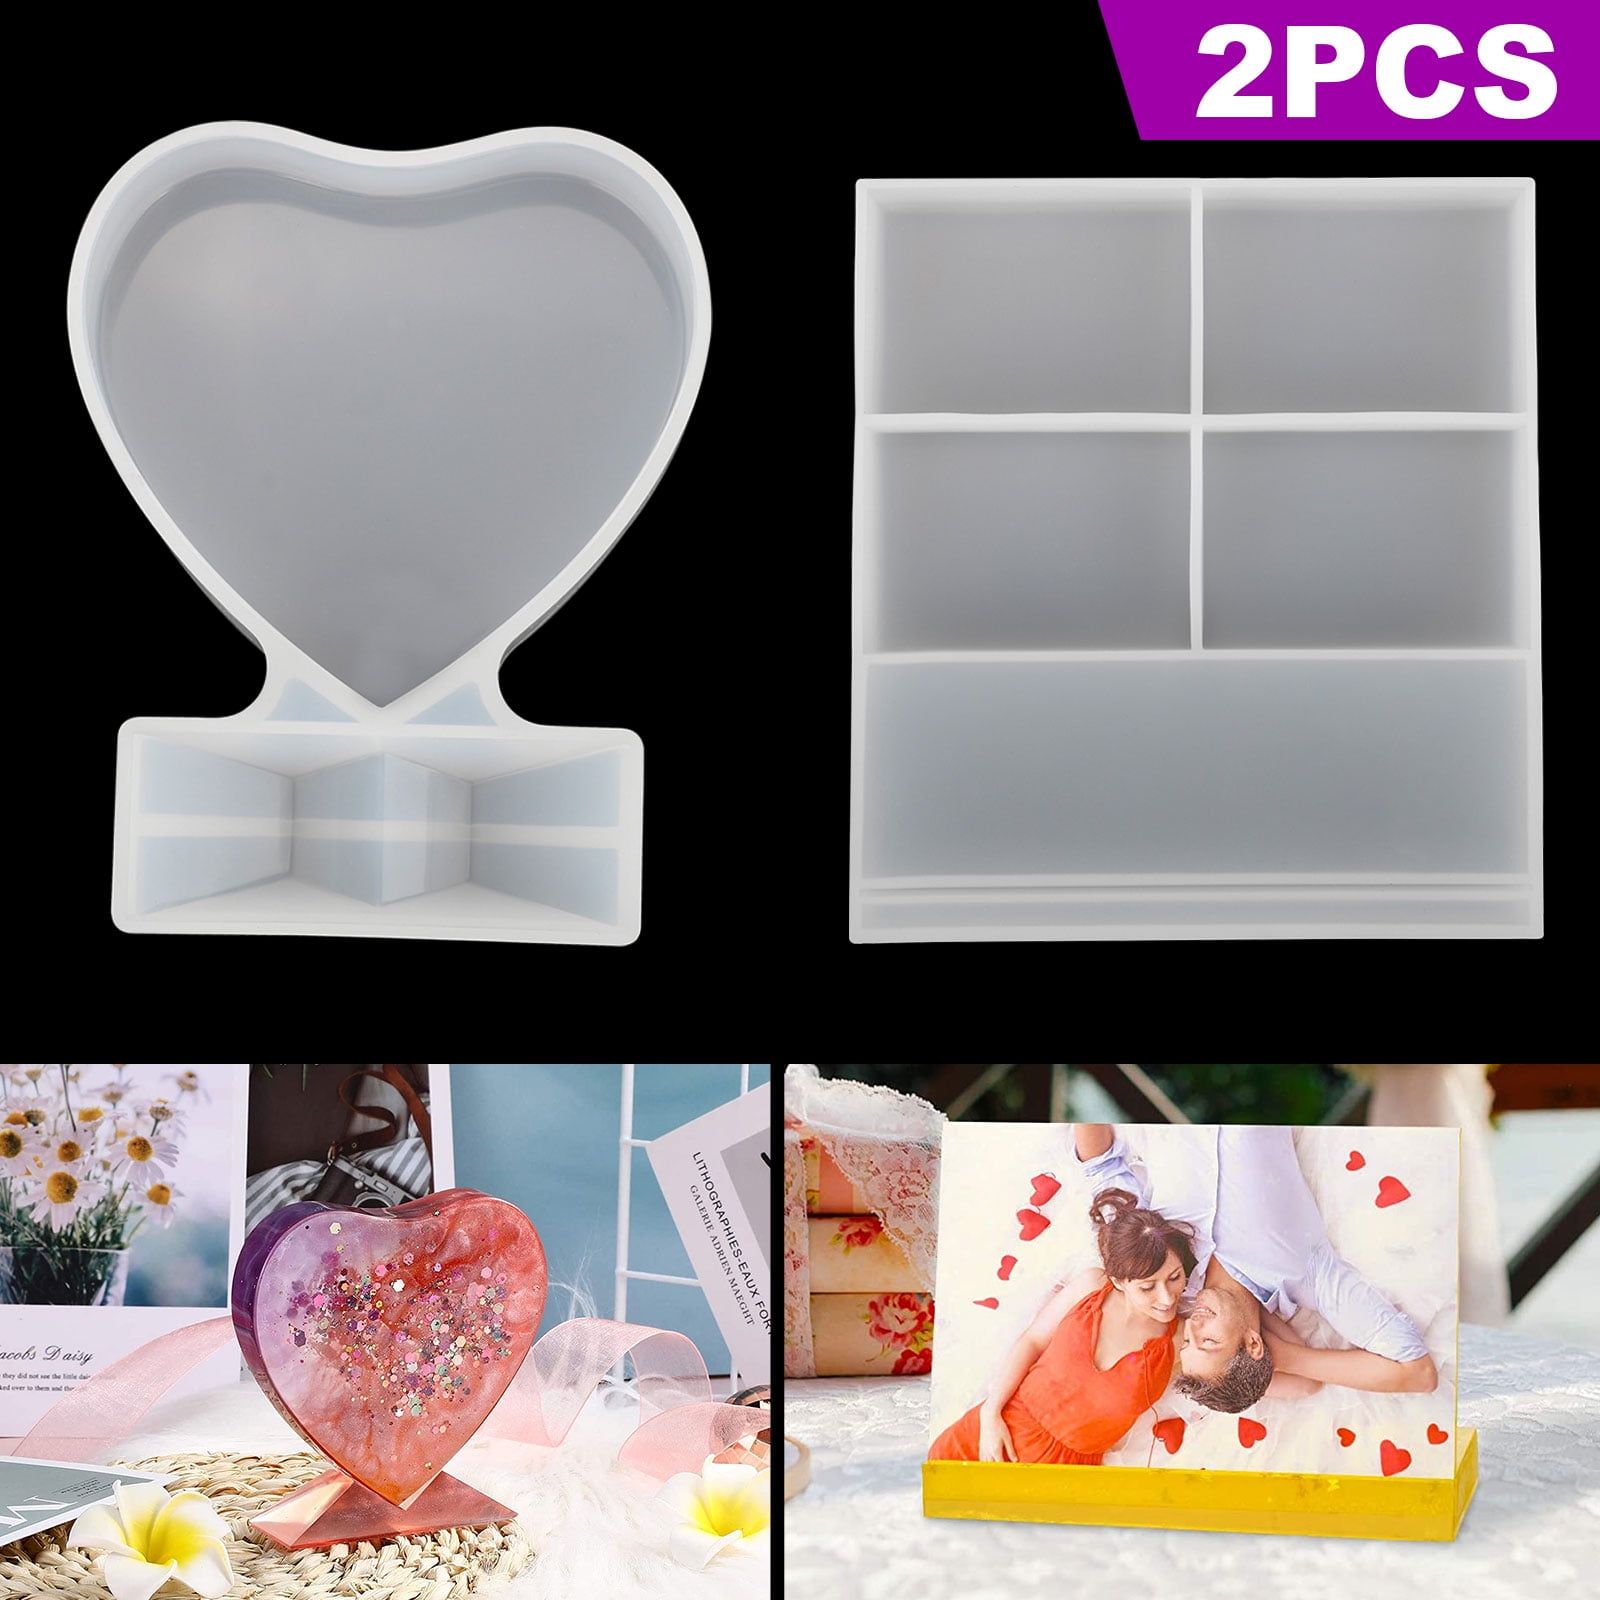 Large Resin Molds, Rectangle Box Silicone Mold for Resin Casting